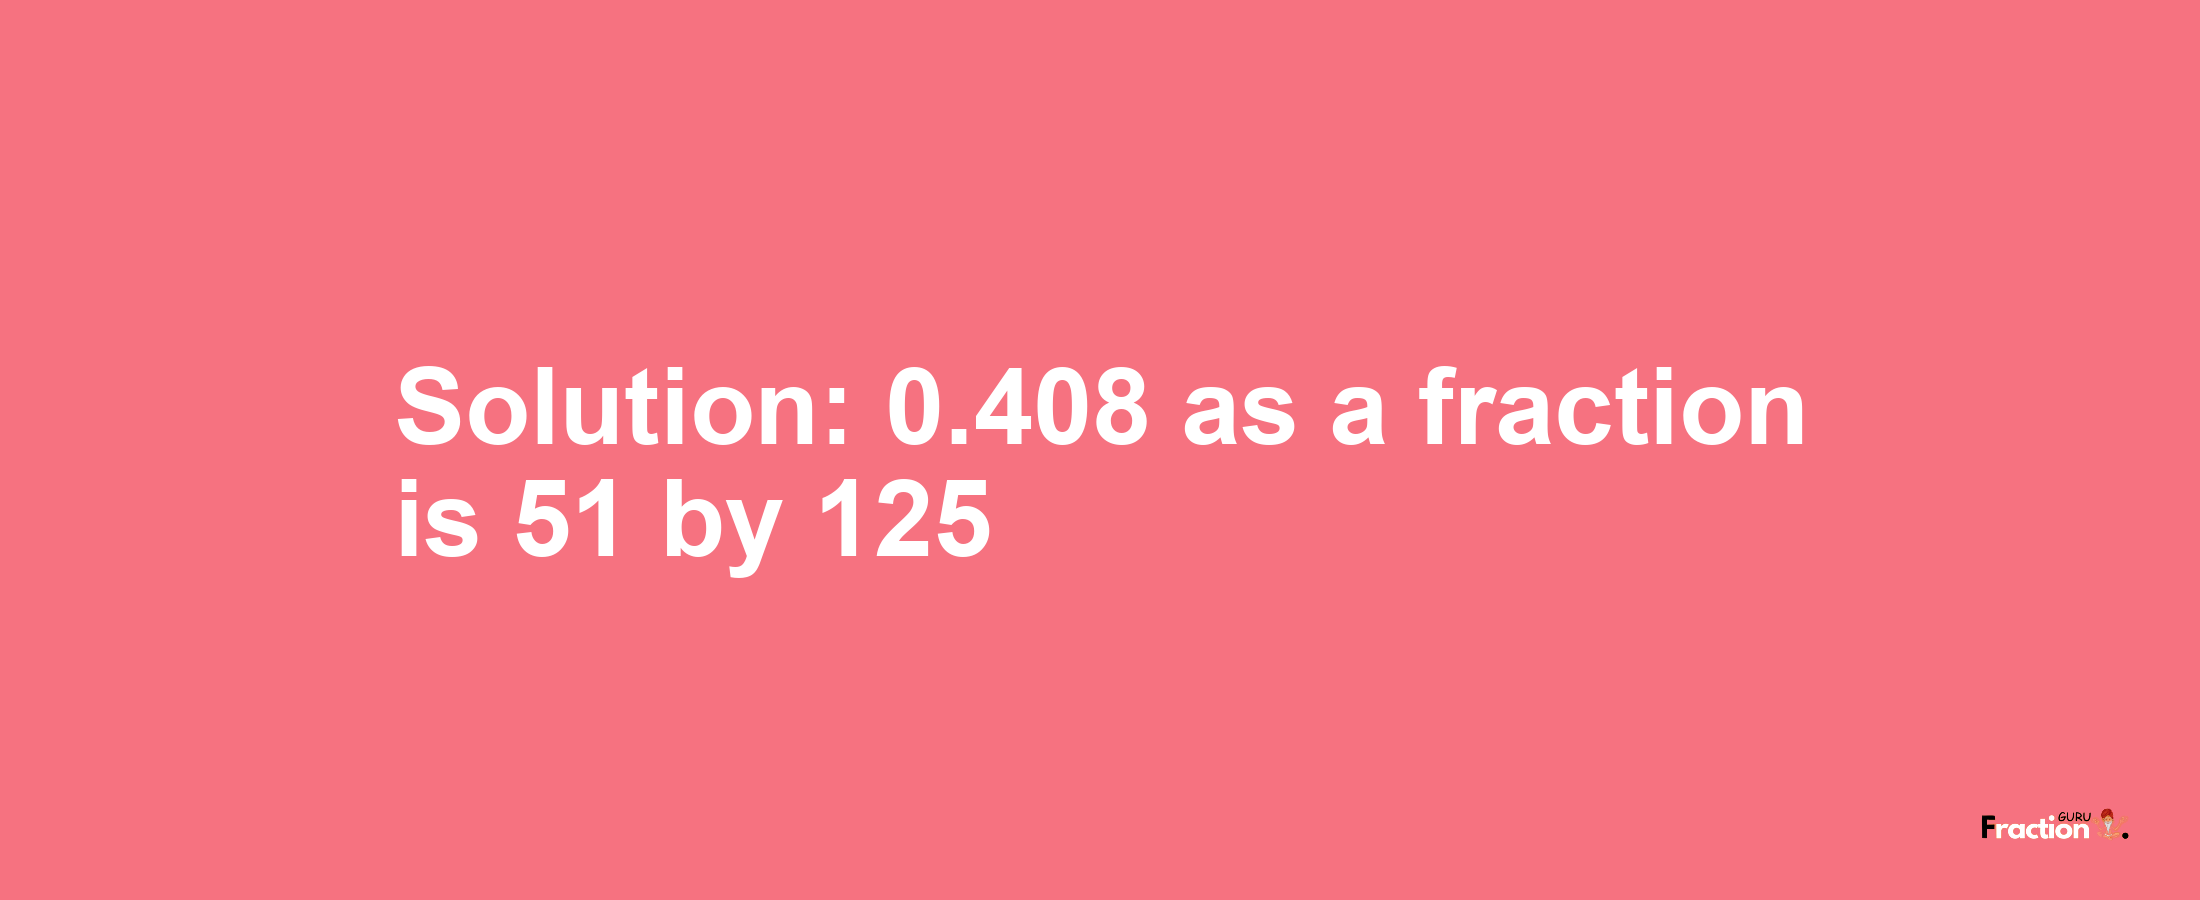 Solution:0.408 as a fraction is 51/125